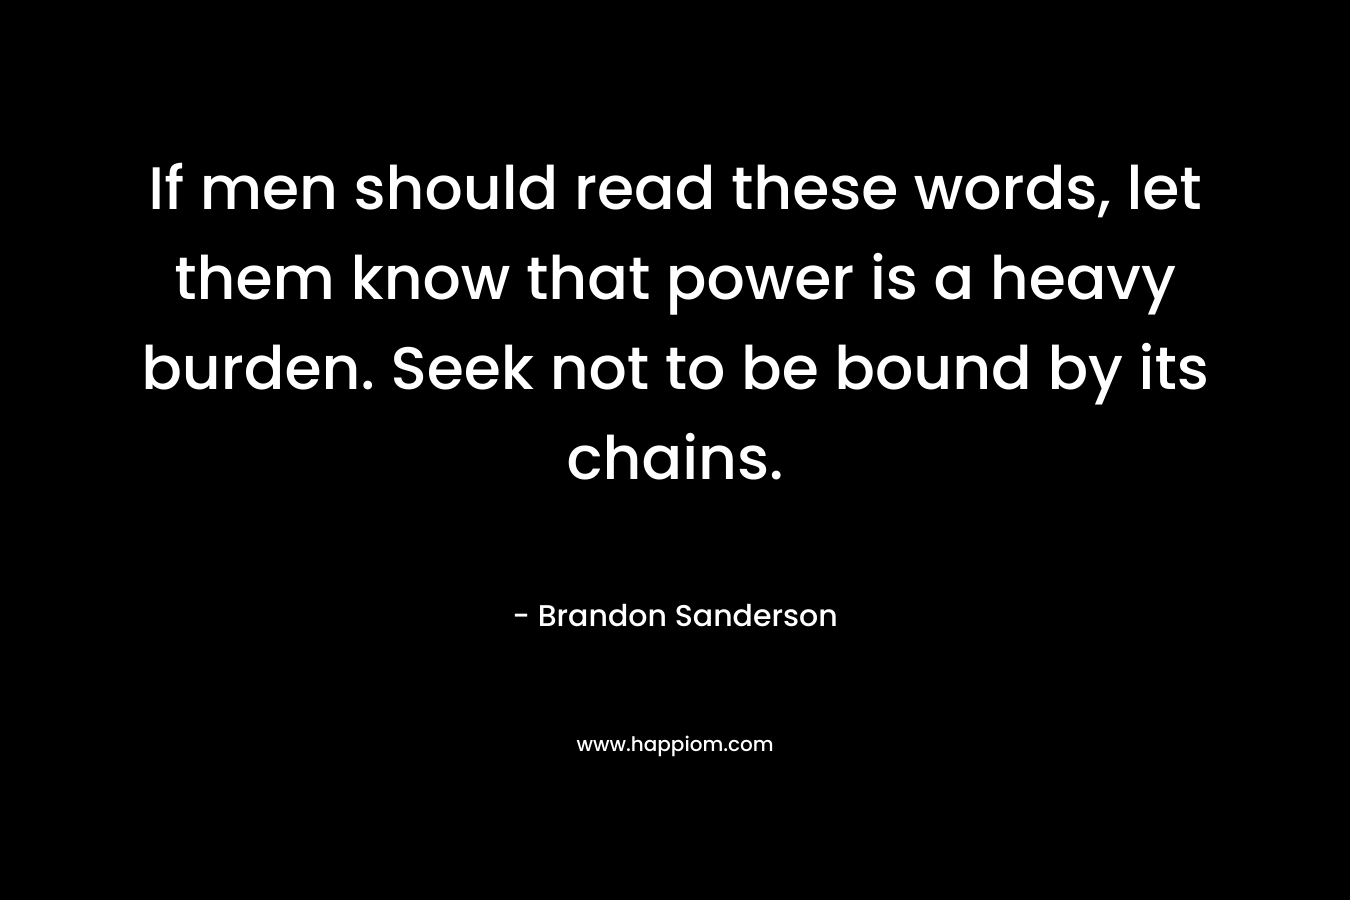 If men should read these words, let them know that power is a heavy burden. Seek not to be bound by its chains.